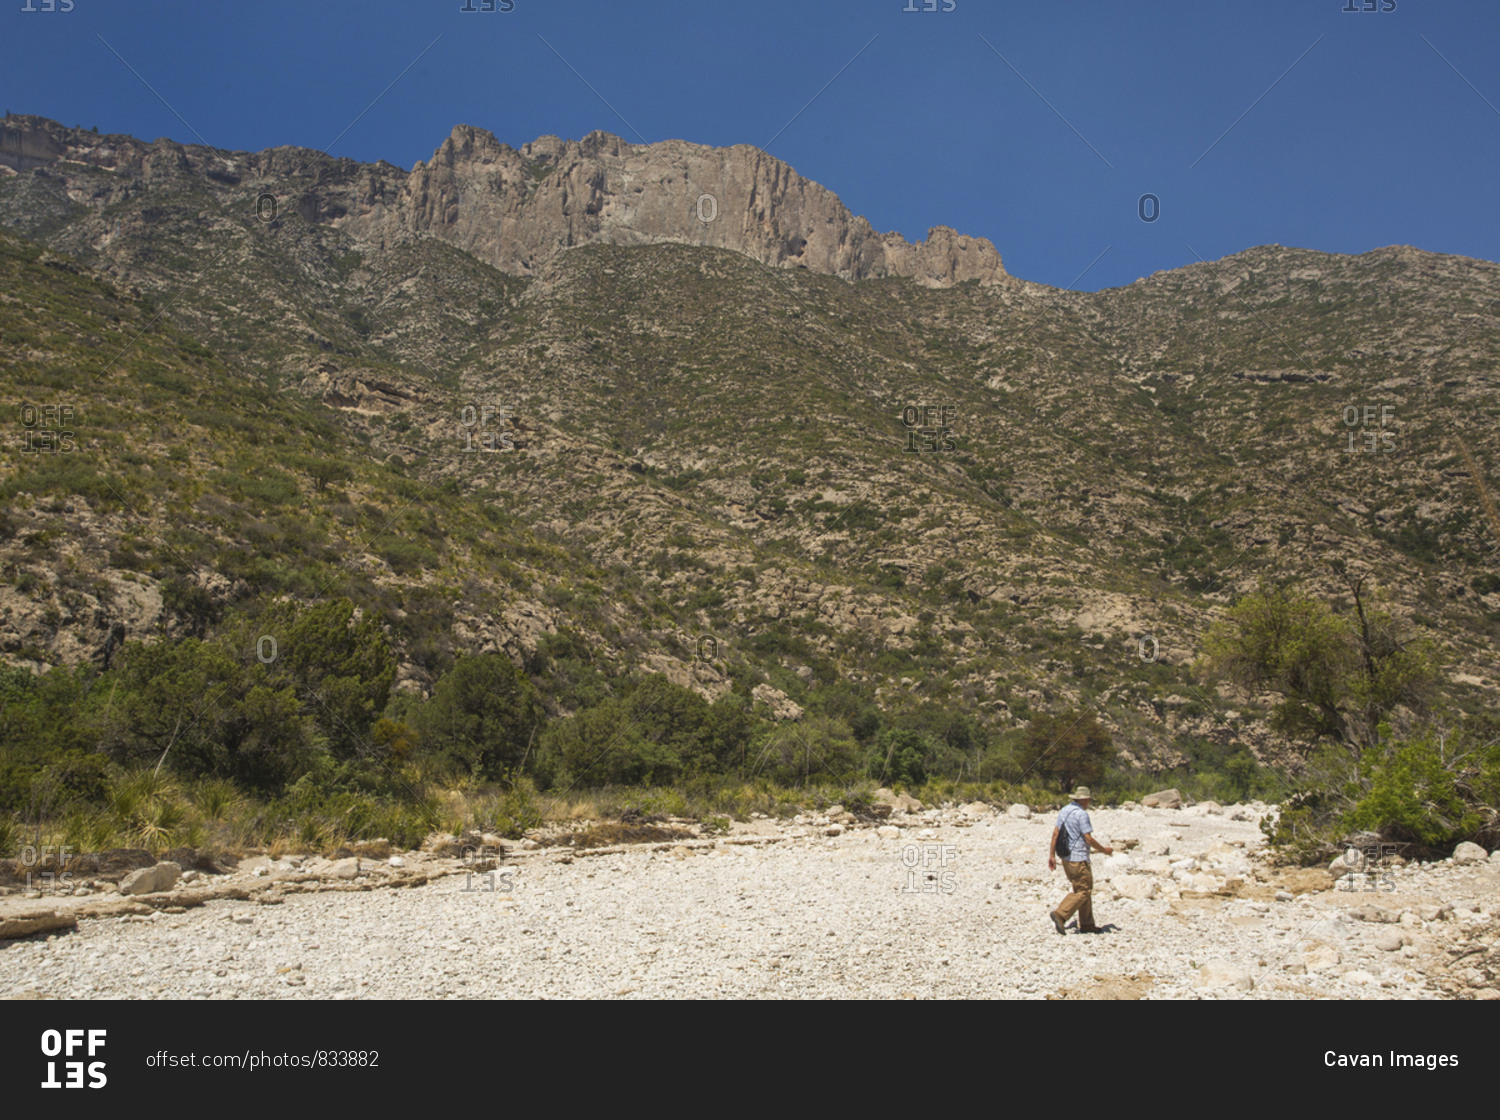 GUADALUPE MOUNTAINS NATIONAL PARK, TEXAS, USA. An older gentleman wearing a wide-brim hat walks across a dry sandy wash in a desert mountain scene.